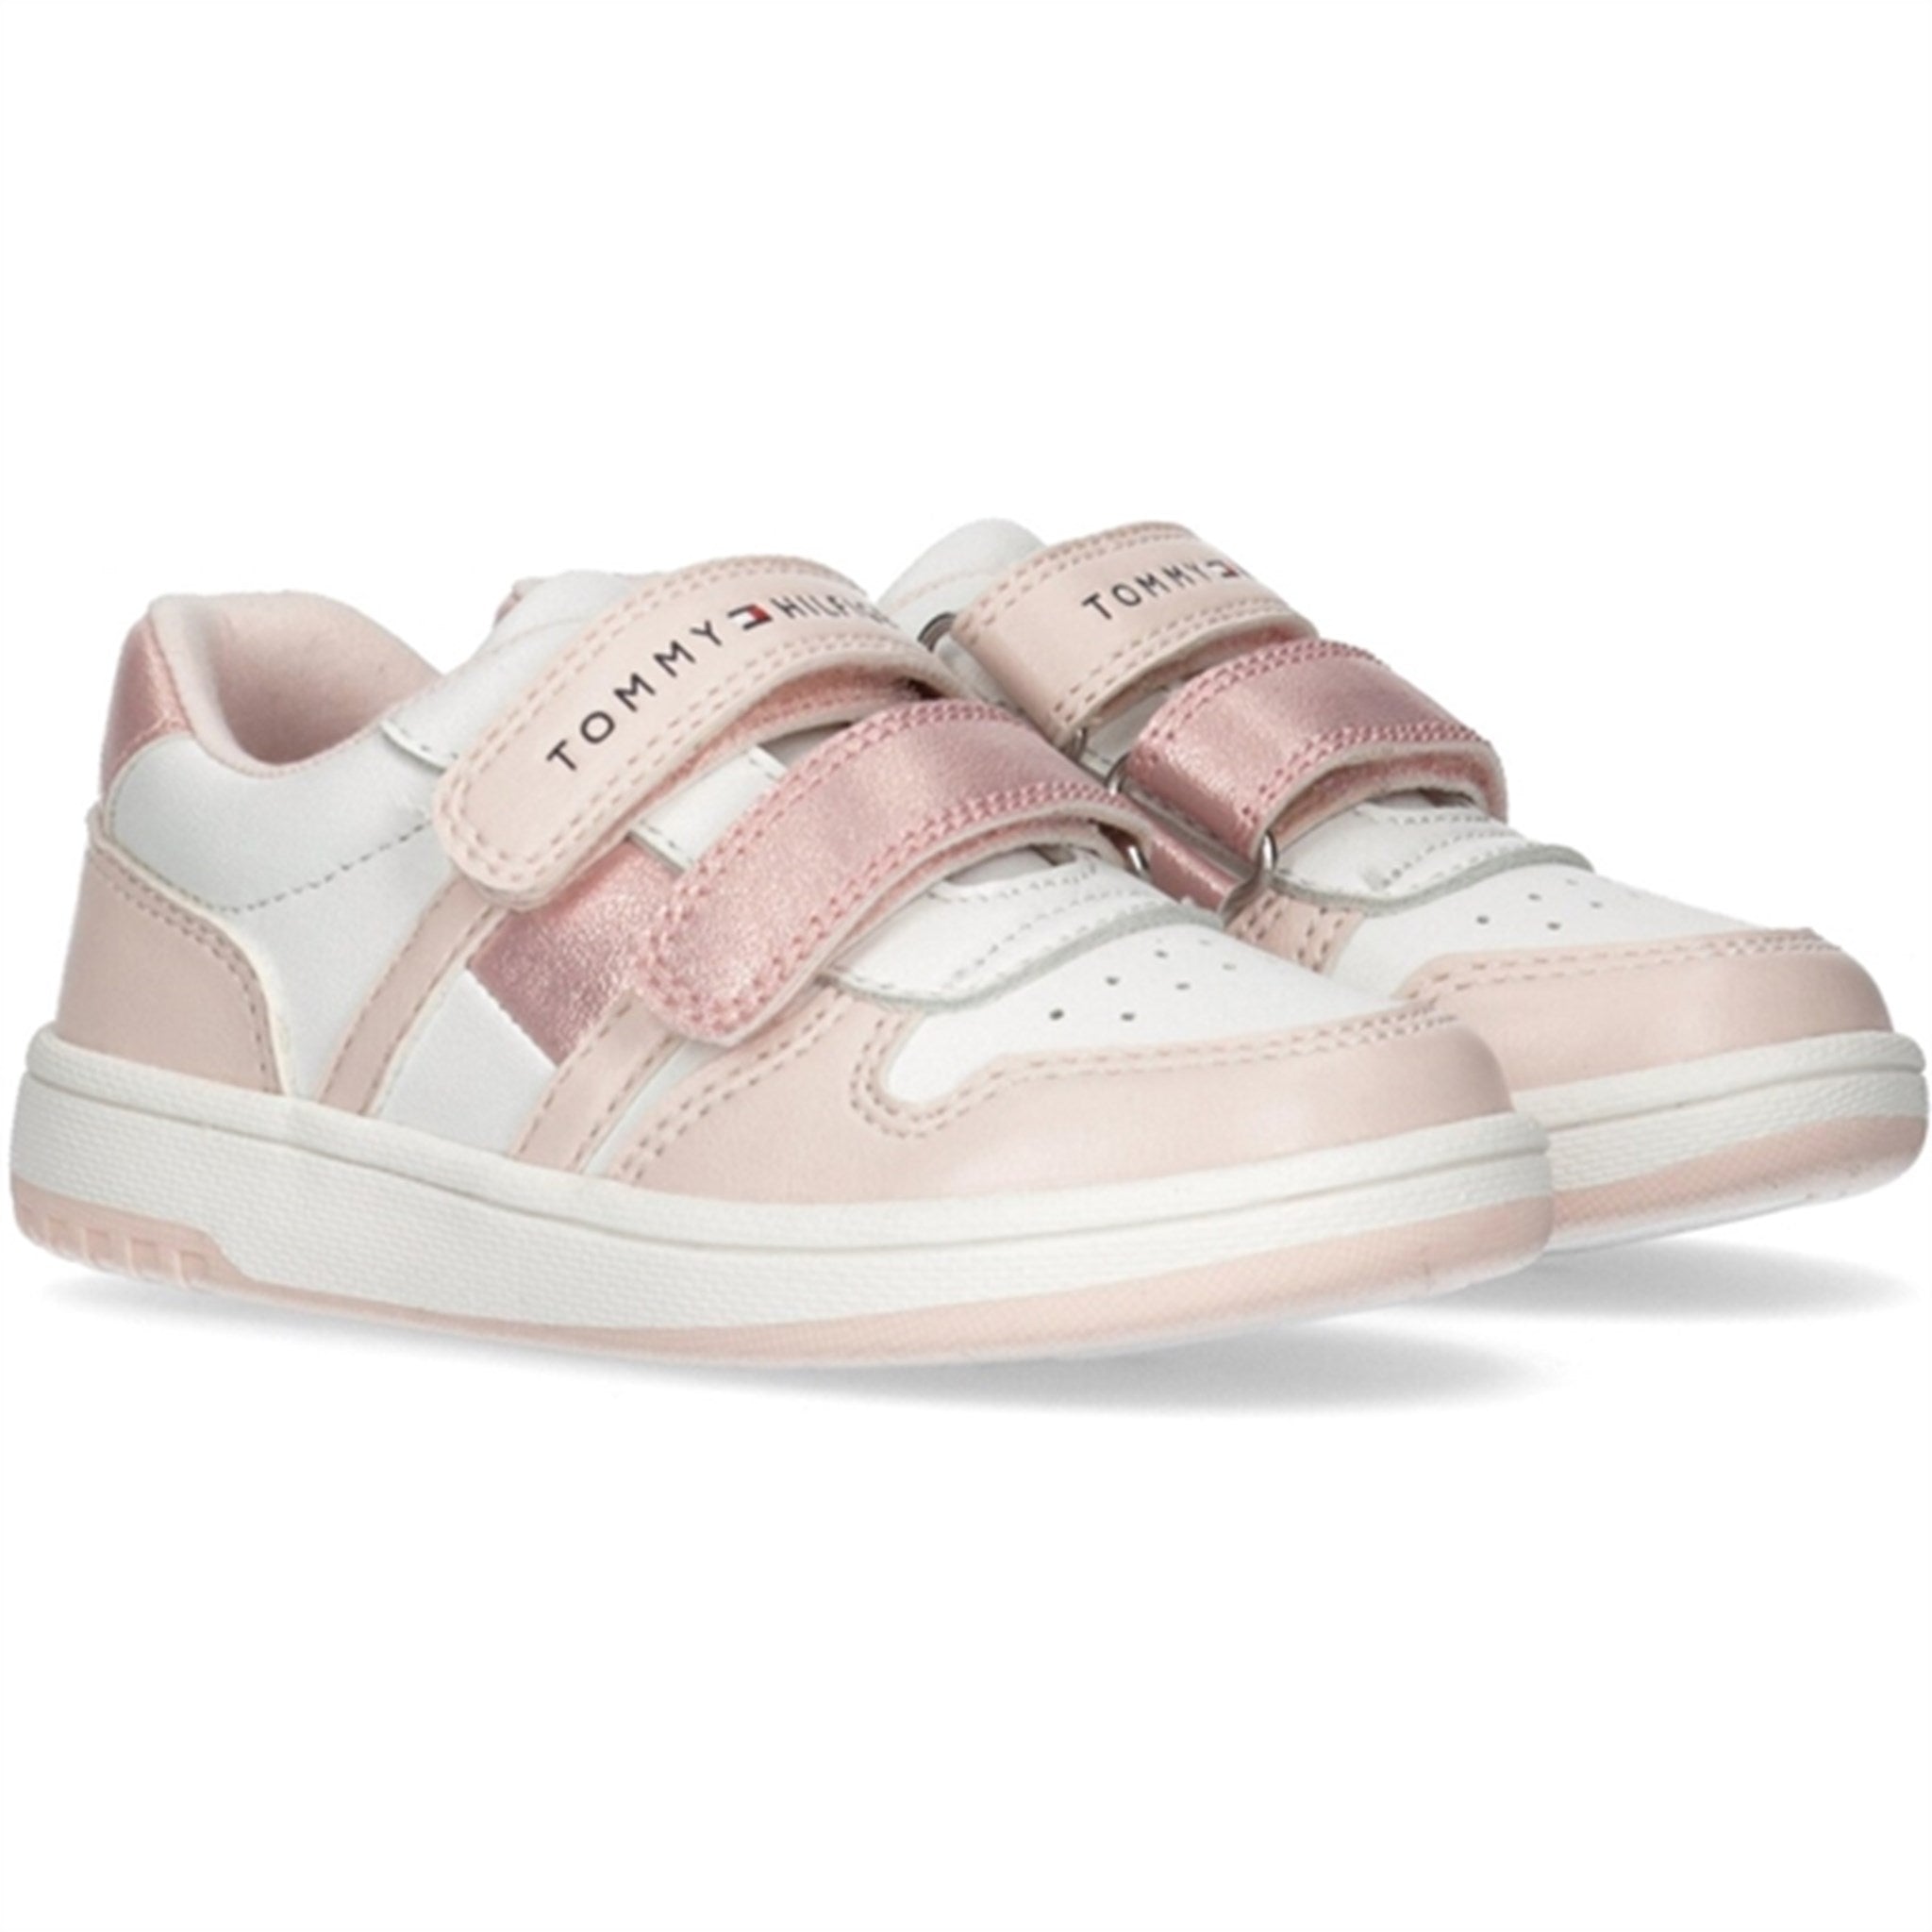 Tommy Hilfiger Low Cut Velcro Sneakers Pink/White 3